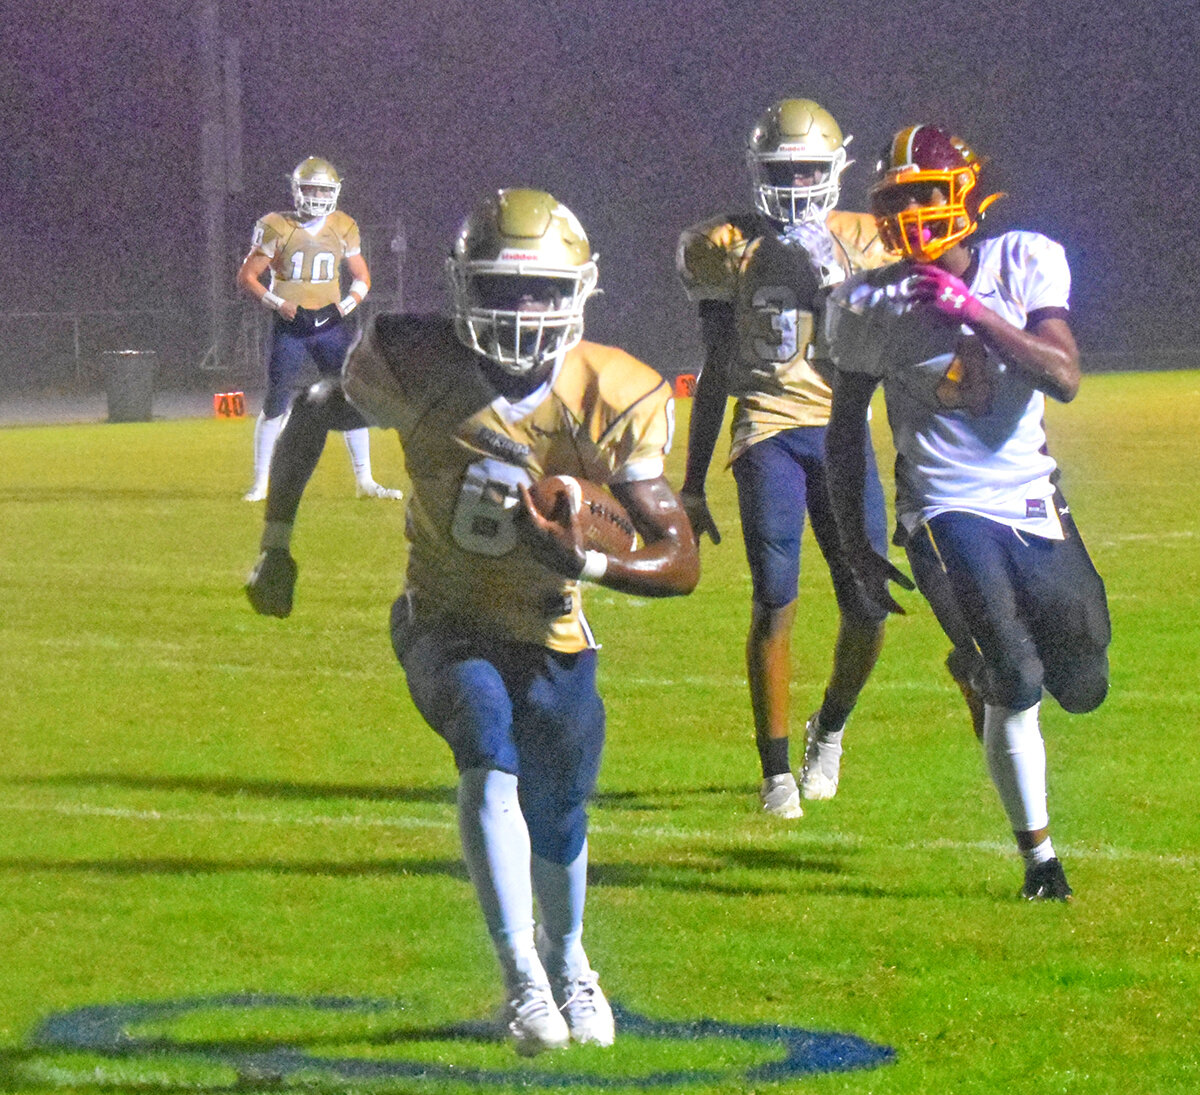 Kayion Marine charged through the rain for a touchdown, laughing as he crossed the goalline. Behind him, at left, is quarterback Blake LaBelle, and #31, Semaj Pinder.